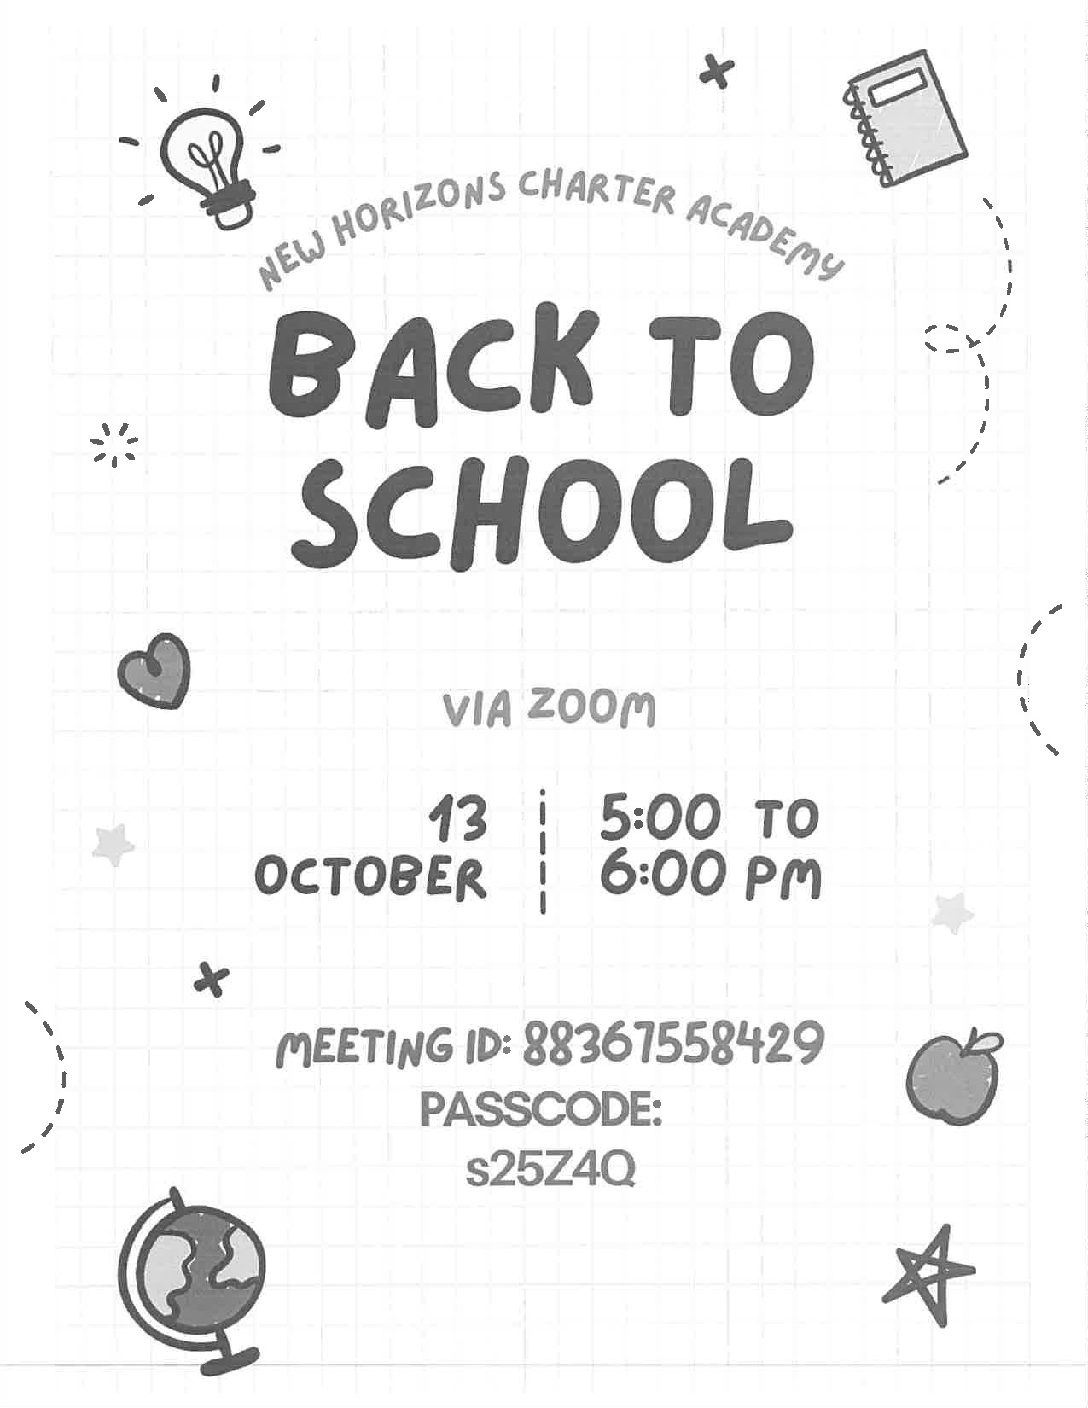 Back to School Night October 13th from 5:00 to 6:00 pm Via Zoom!